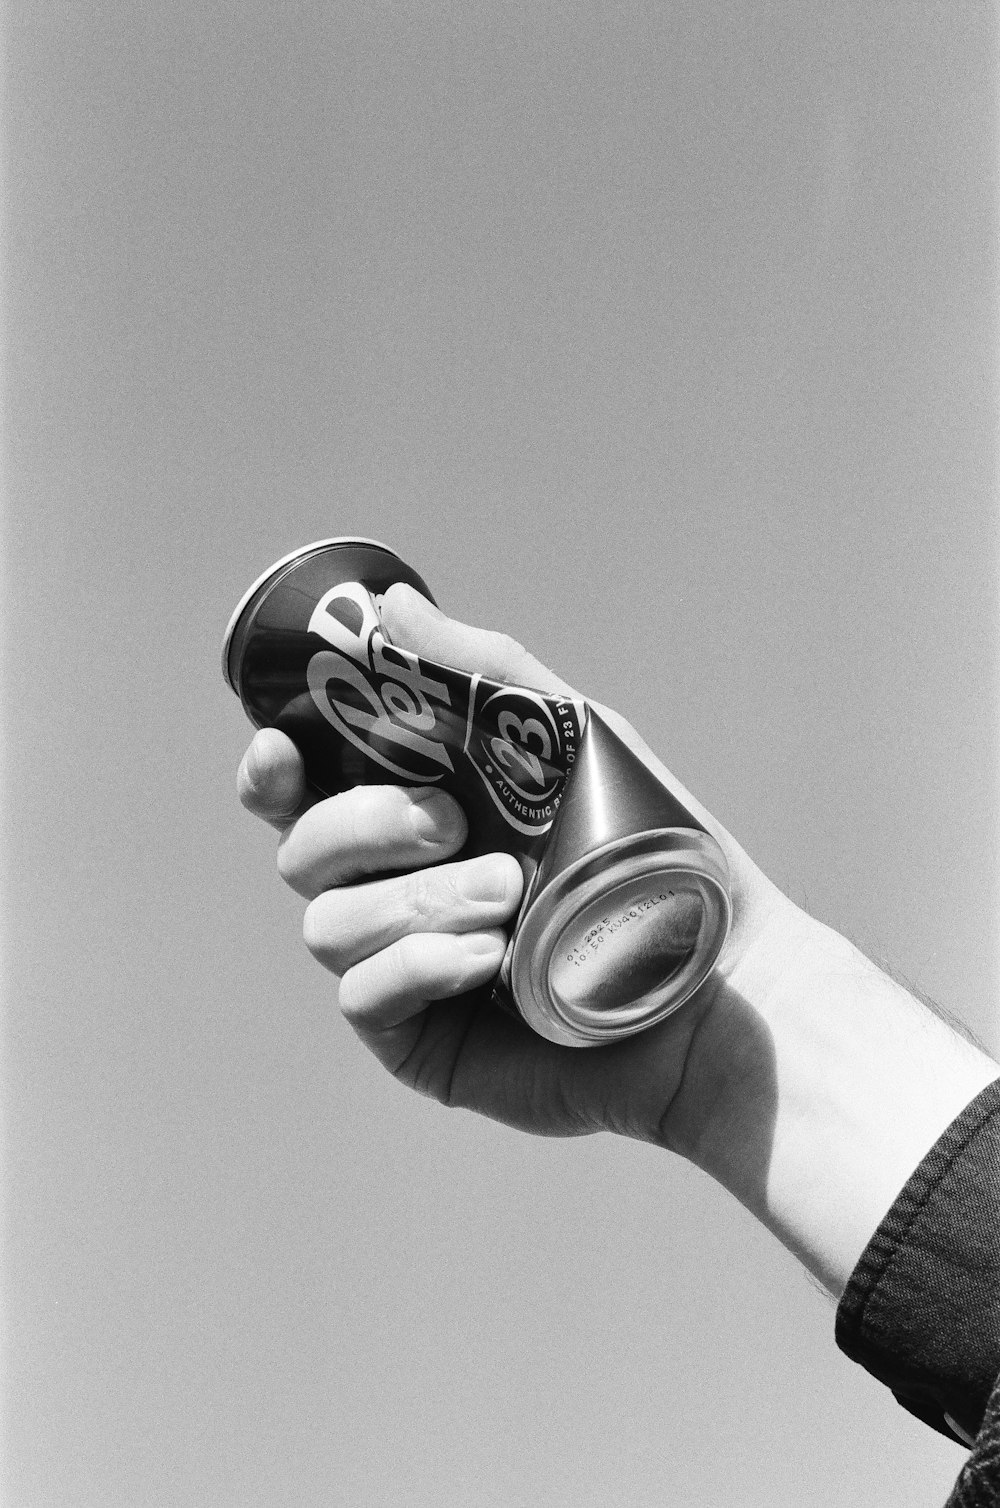 a person holding a can of soda in their hand